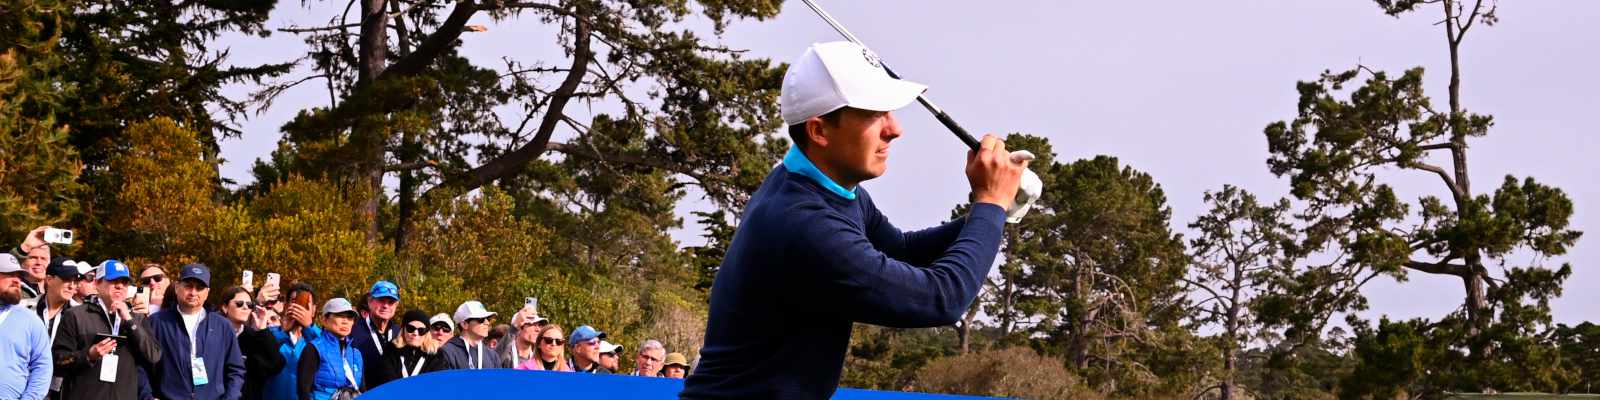 Jordan Spieth (photo by Getty Images)